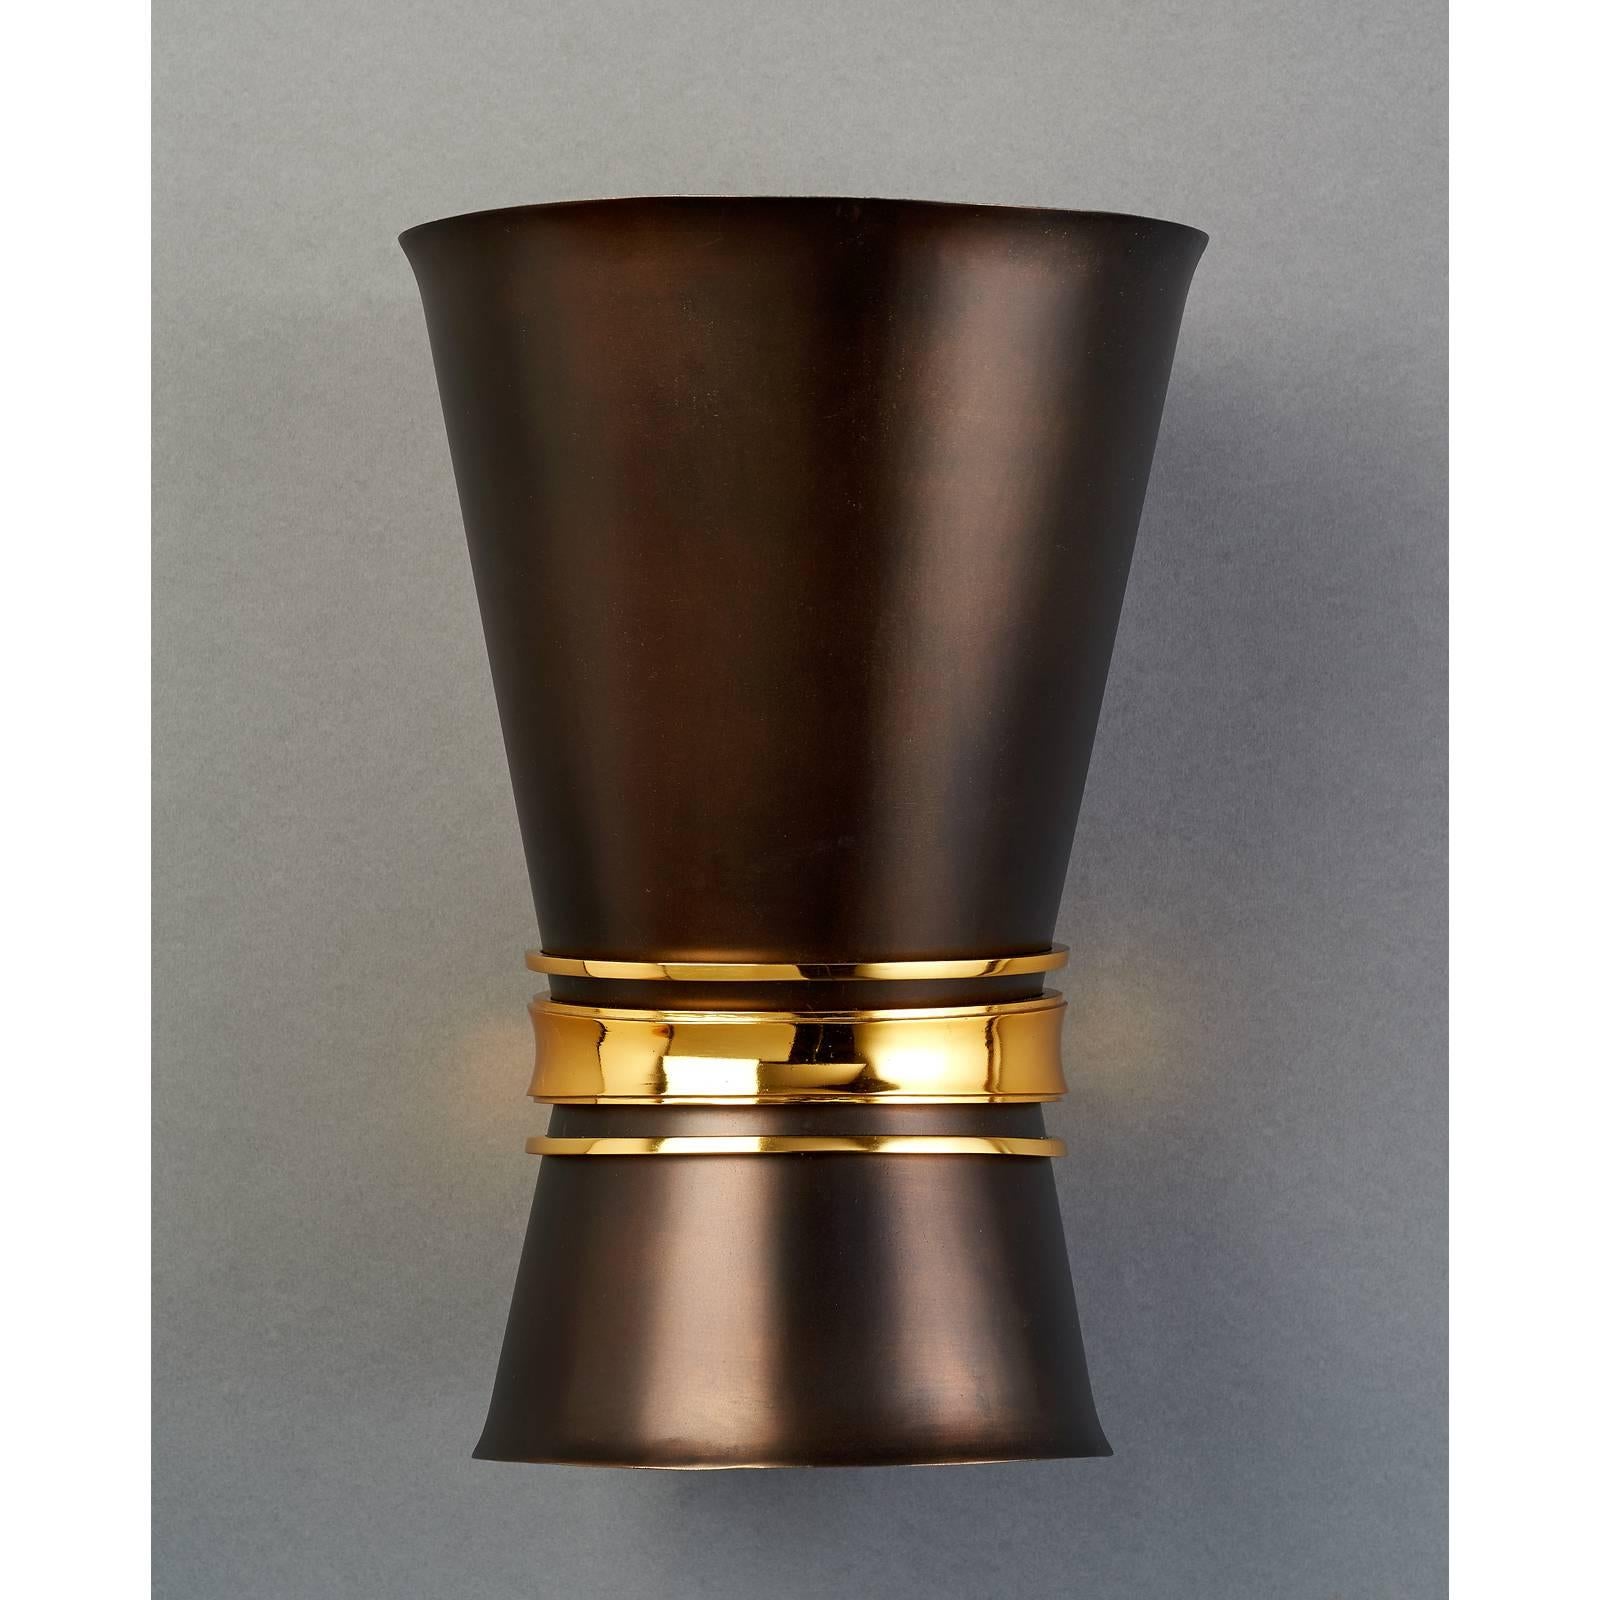 France, 1950s.
A stunning pair of sconces in oxidized metal with rich polished bronze mounts,
attributed to Maxime Old.
Rewired for use in the USA: Standard base downlight, halogen uplight.
Measures: 9 W x 13.5 H x 10 proj.